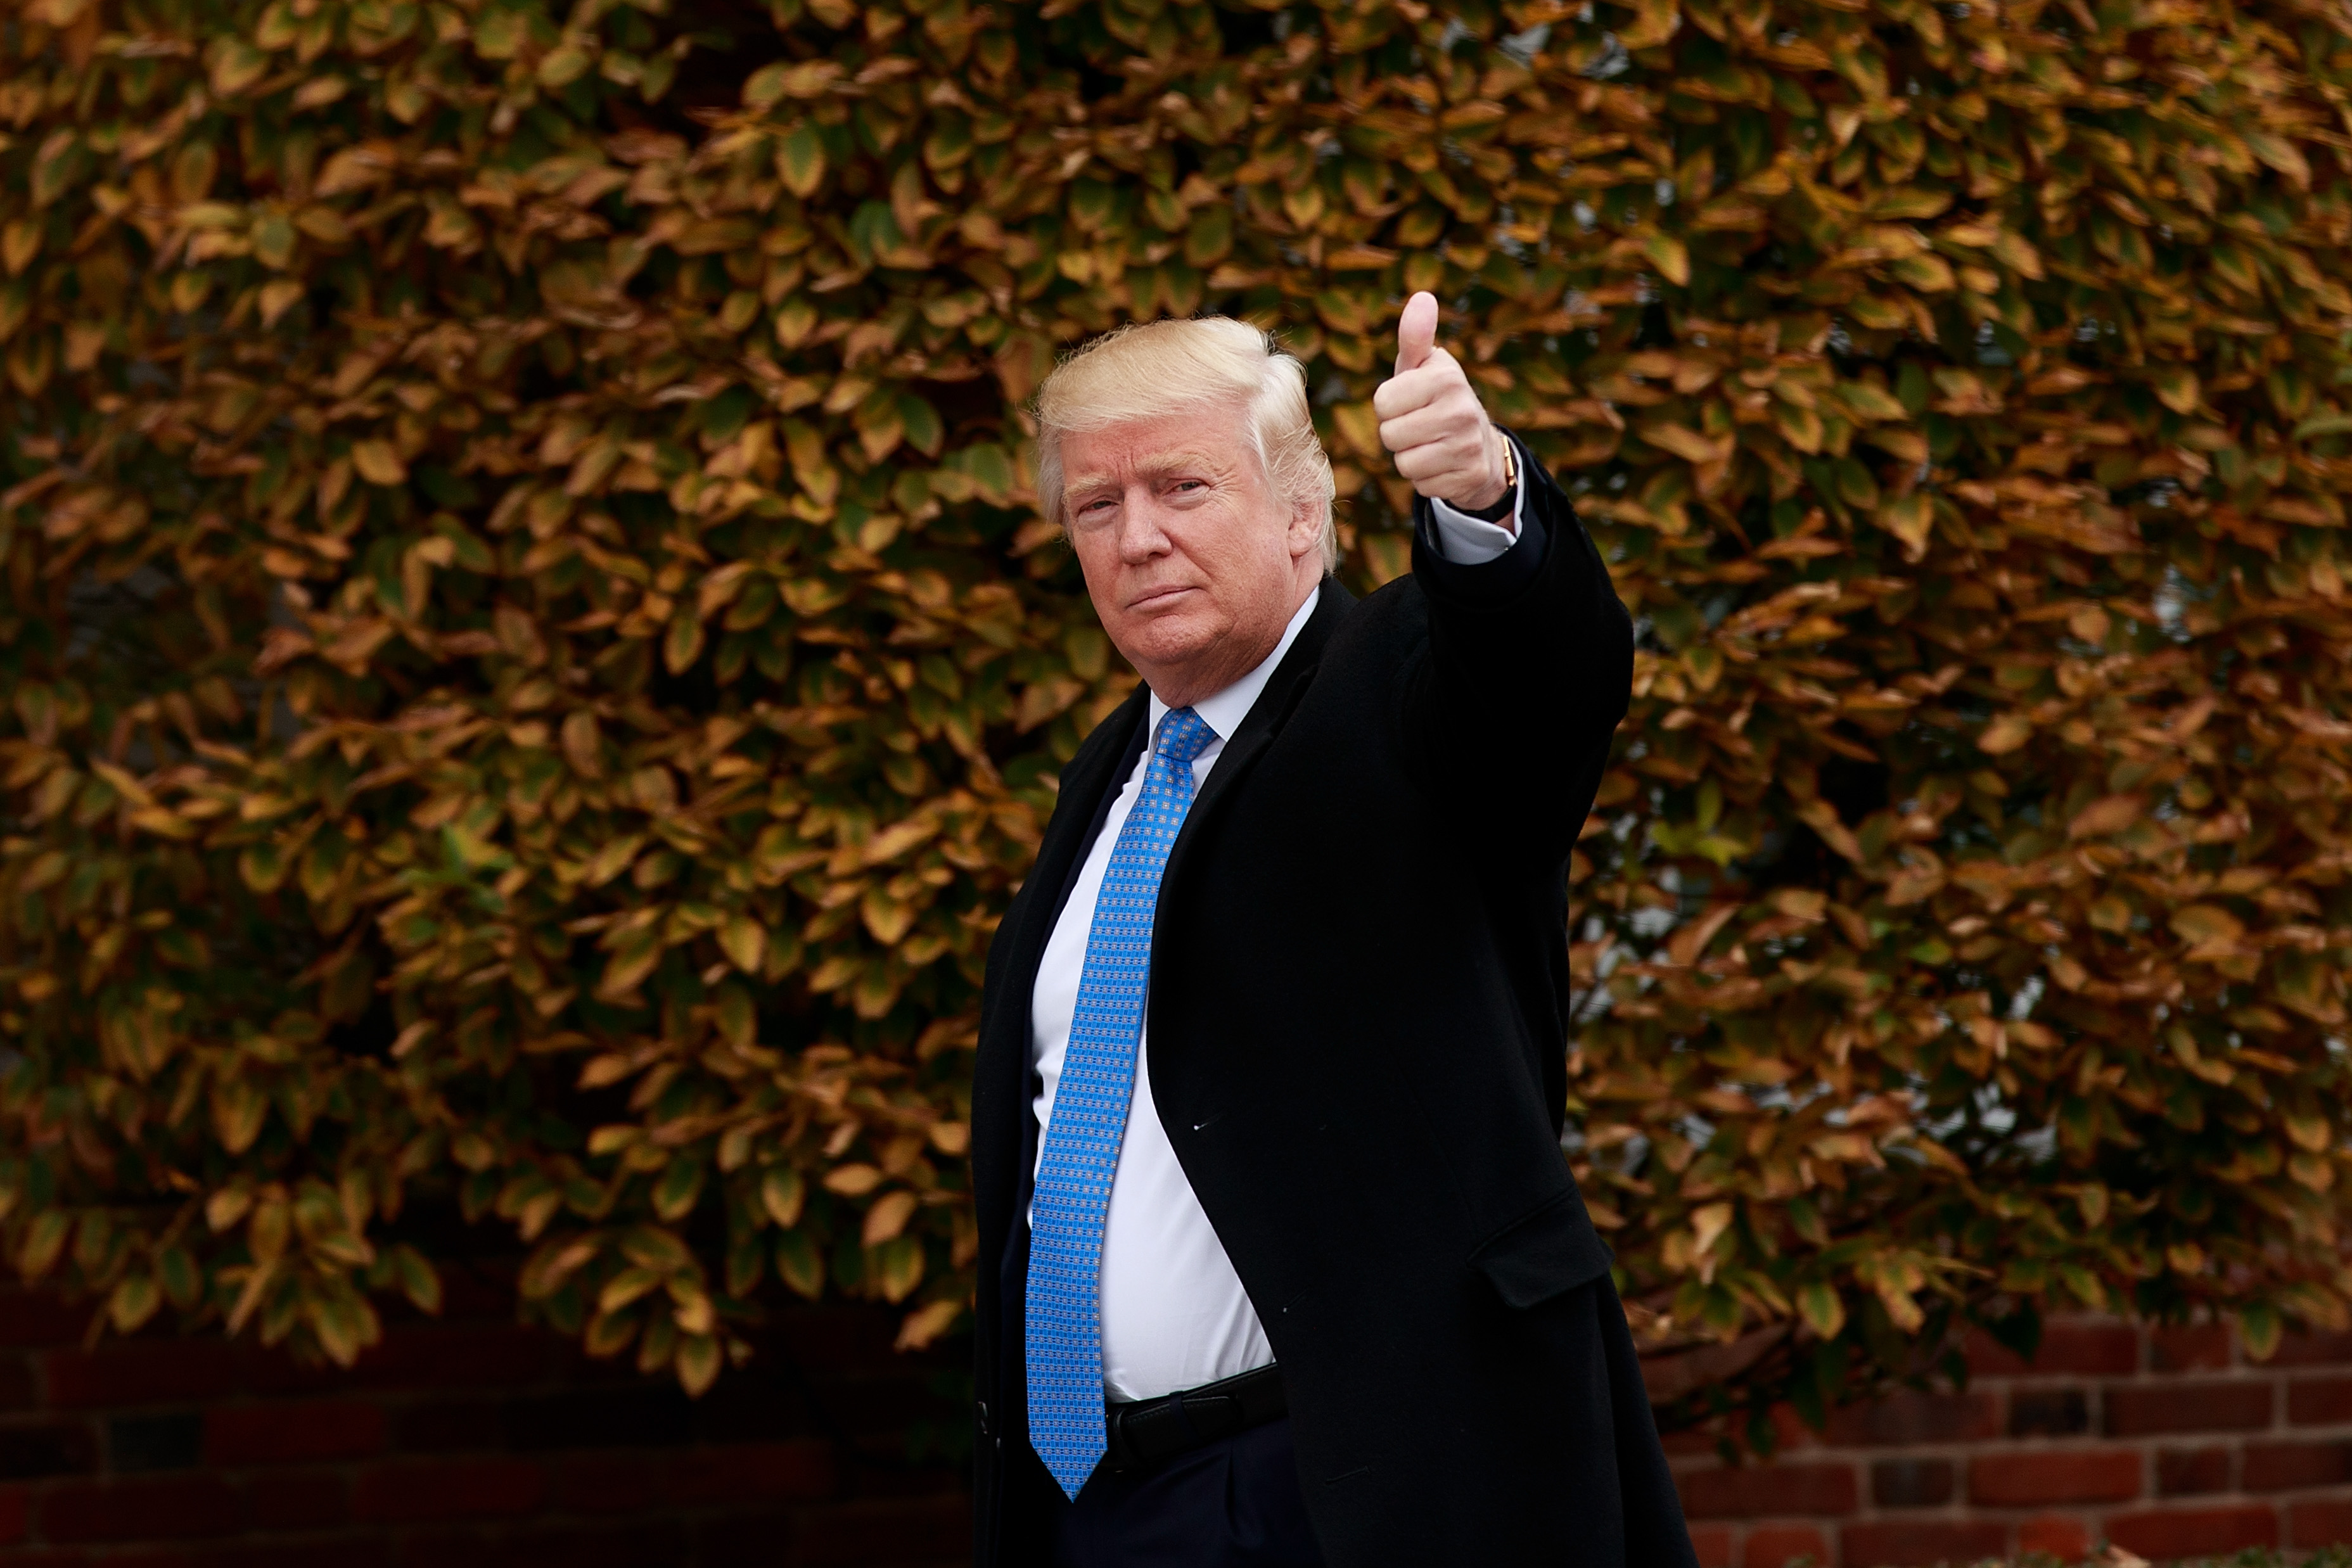 President-elect Donald Trump waves as he arrives at Trump International Golf Club for a day of meetings in Bedminster Township, NY, on Nov. 20, 2016. (Drew Angerer—Getty Images)